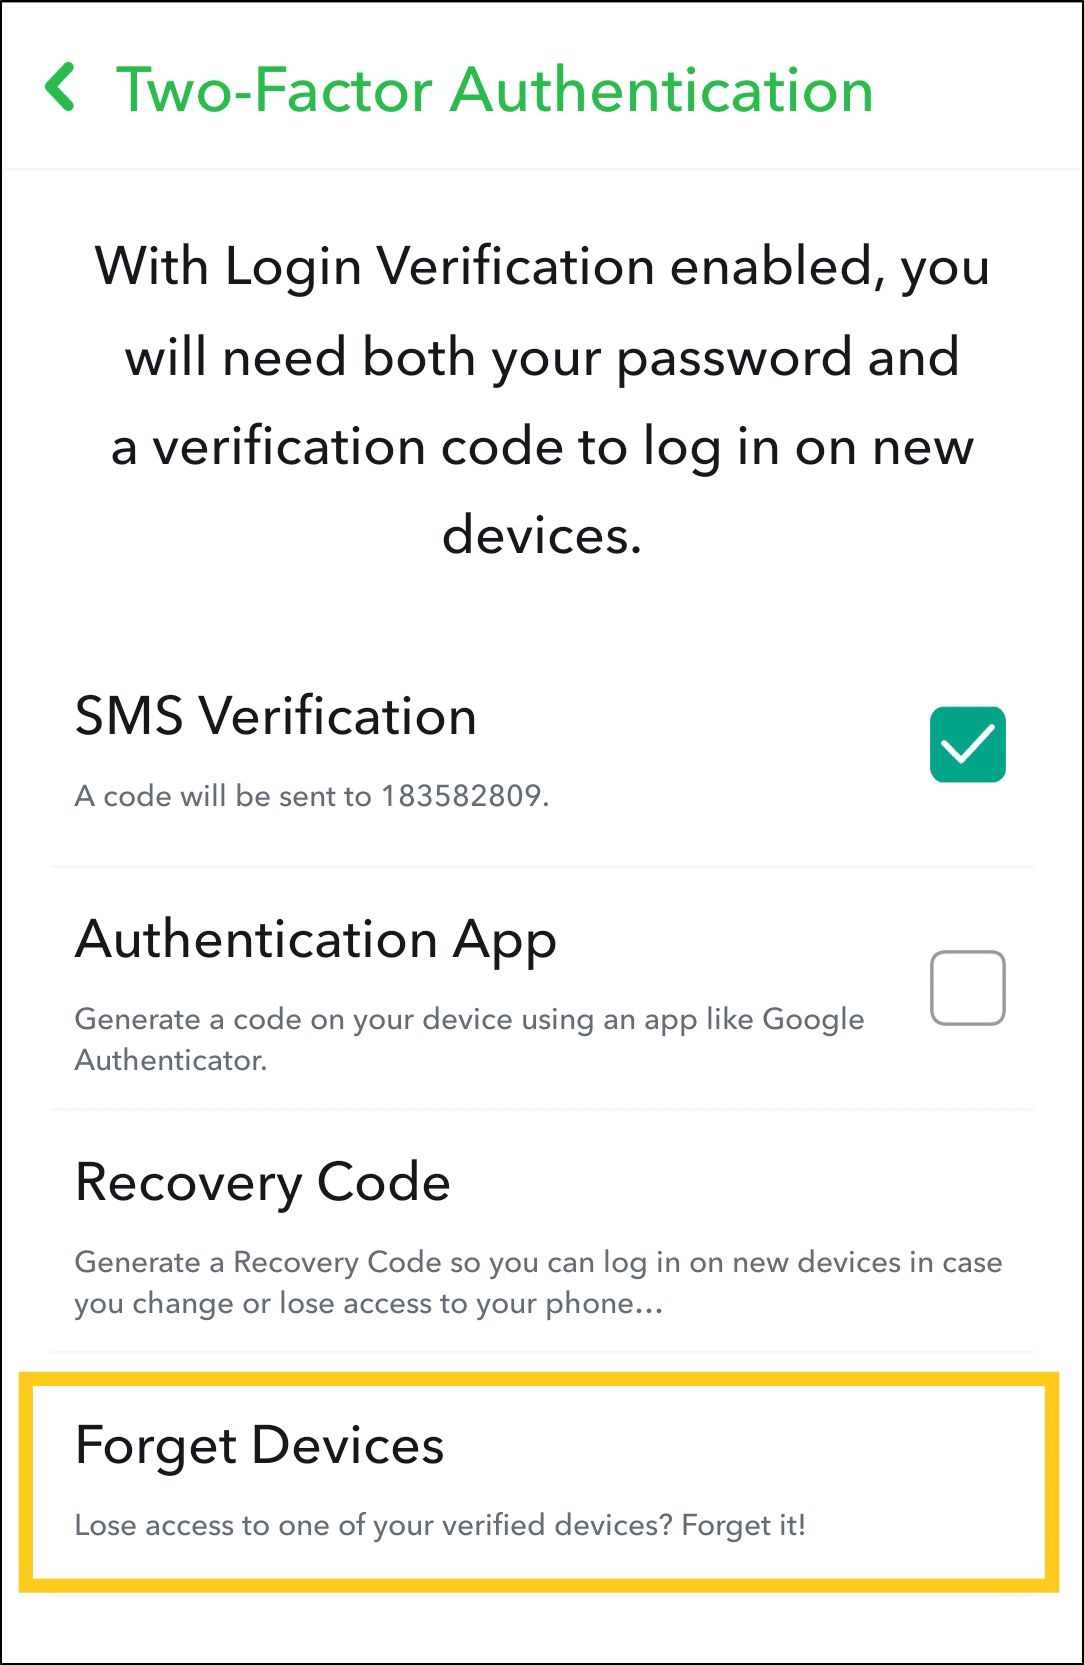 Forget any unrecognized linked devices to secure Snapchat account to fix can't log in, sign in to Snapchat, password not working, or Could Not Connect error